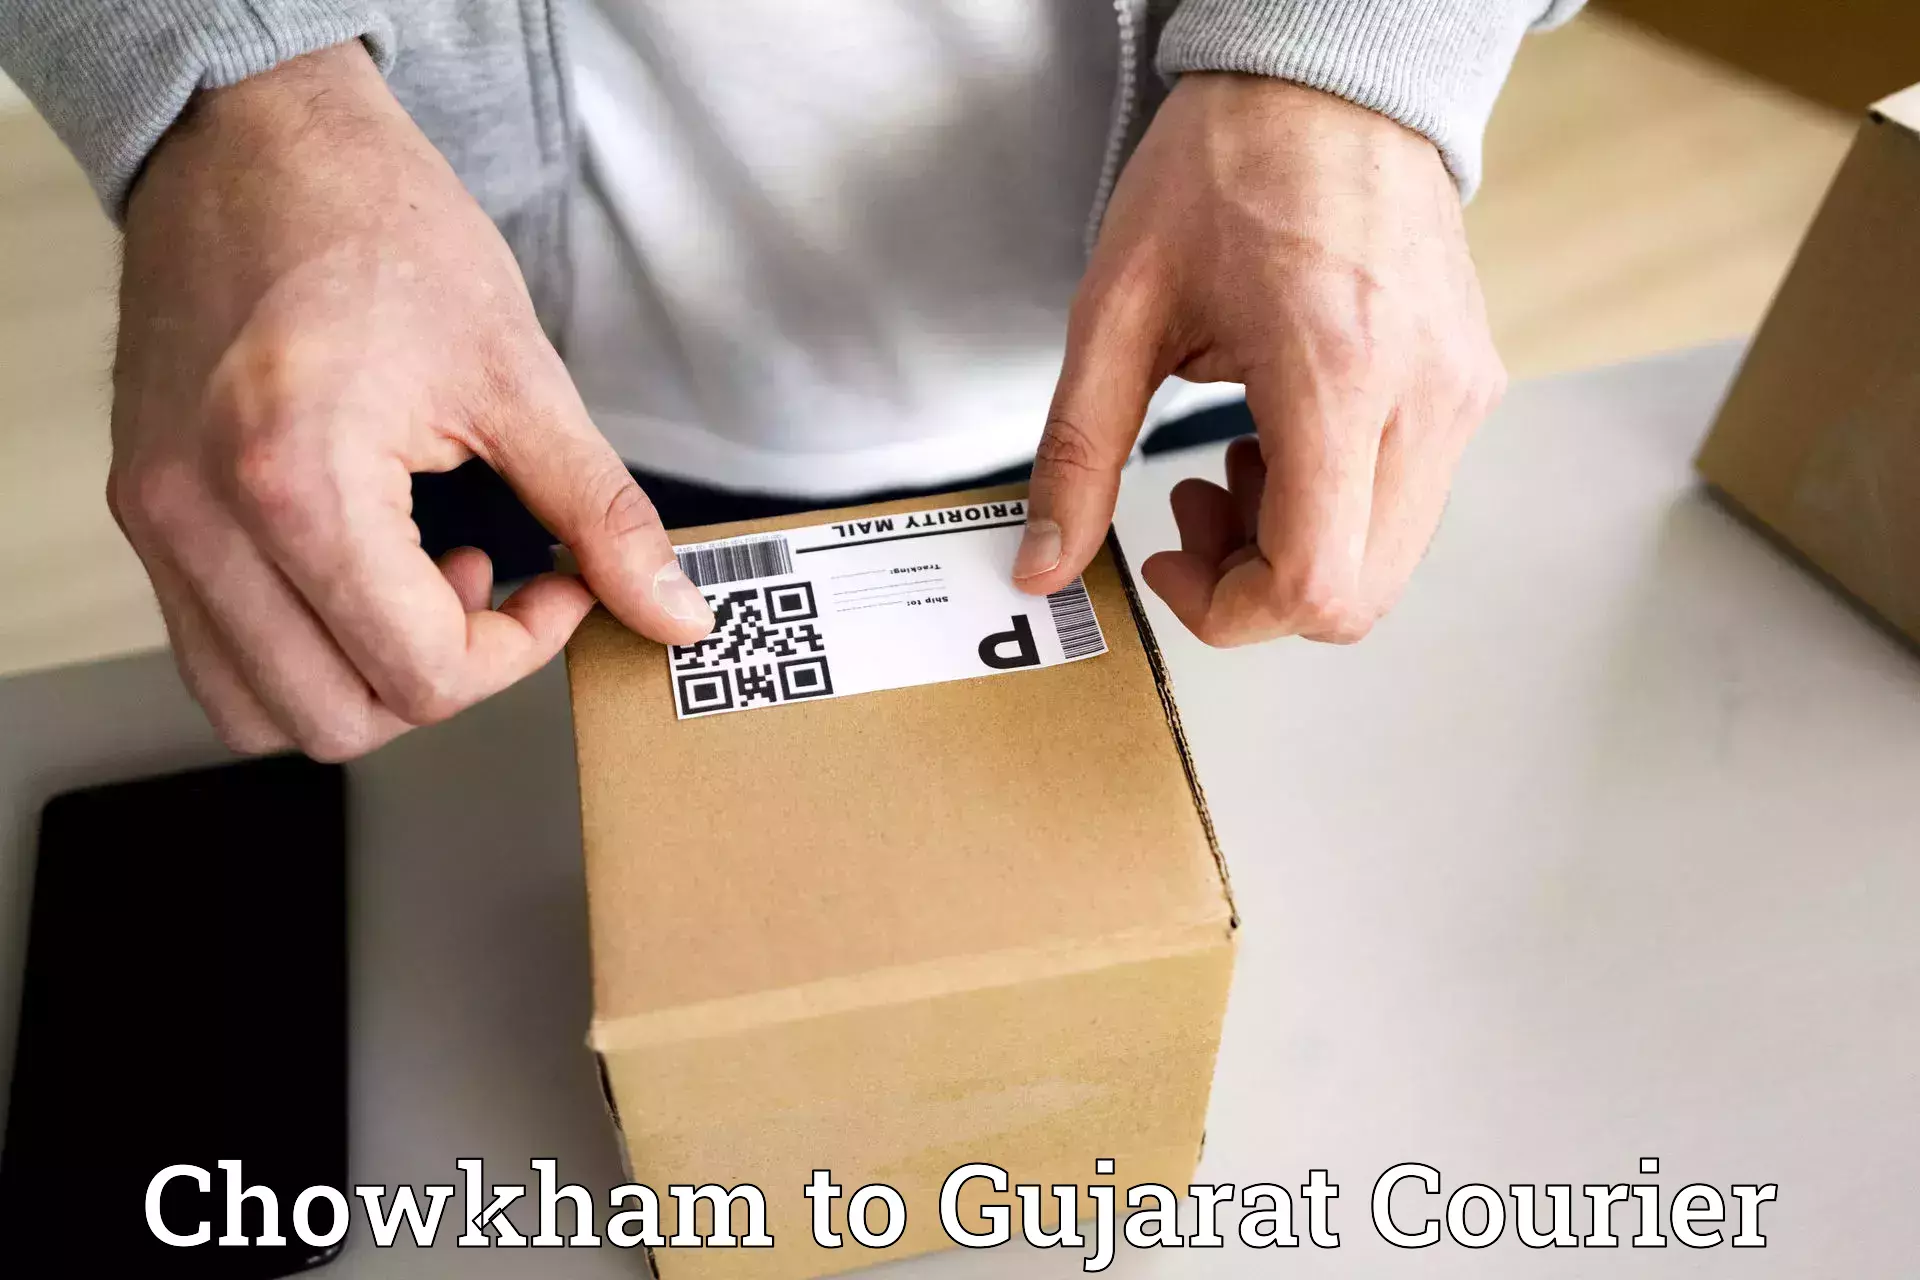 Quality courier services Chowkham to Rajkot